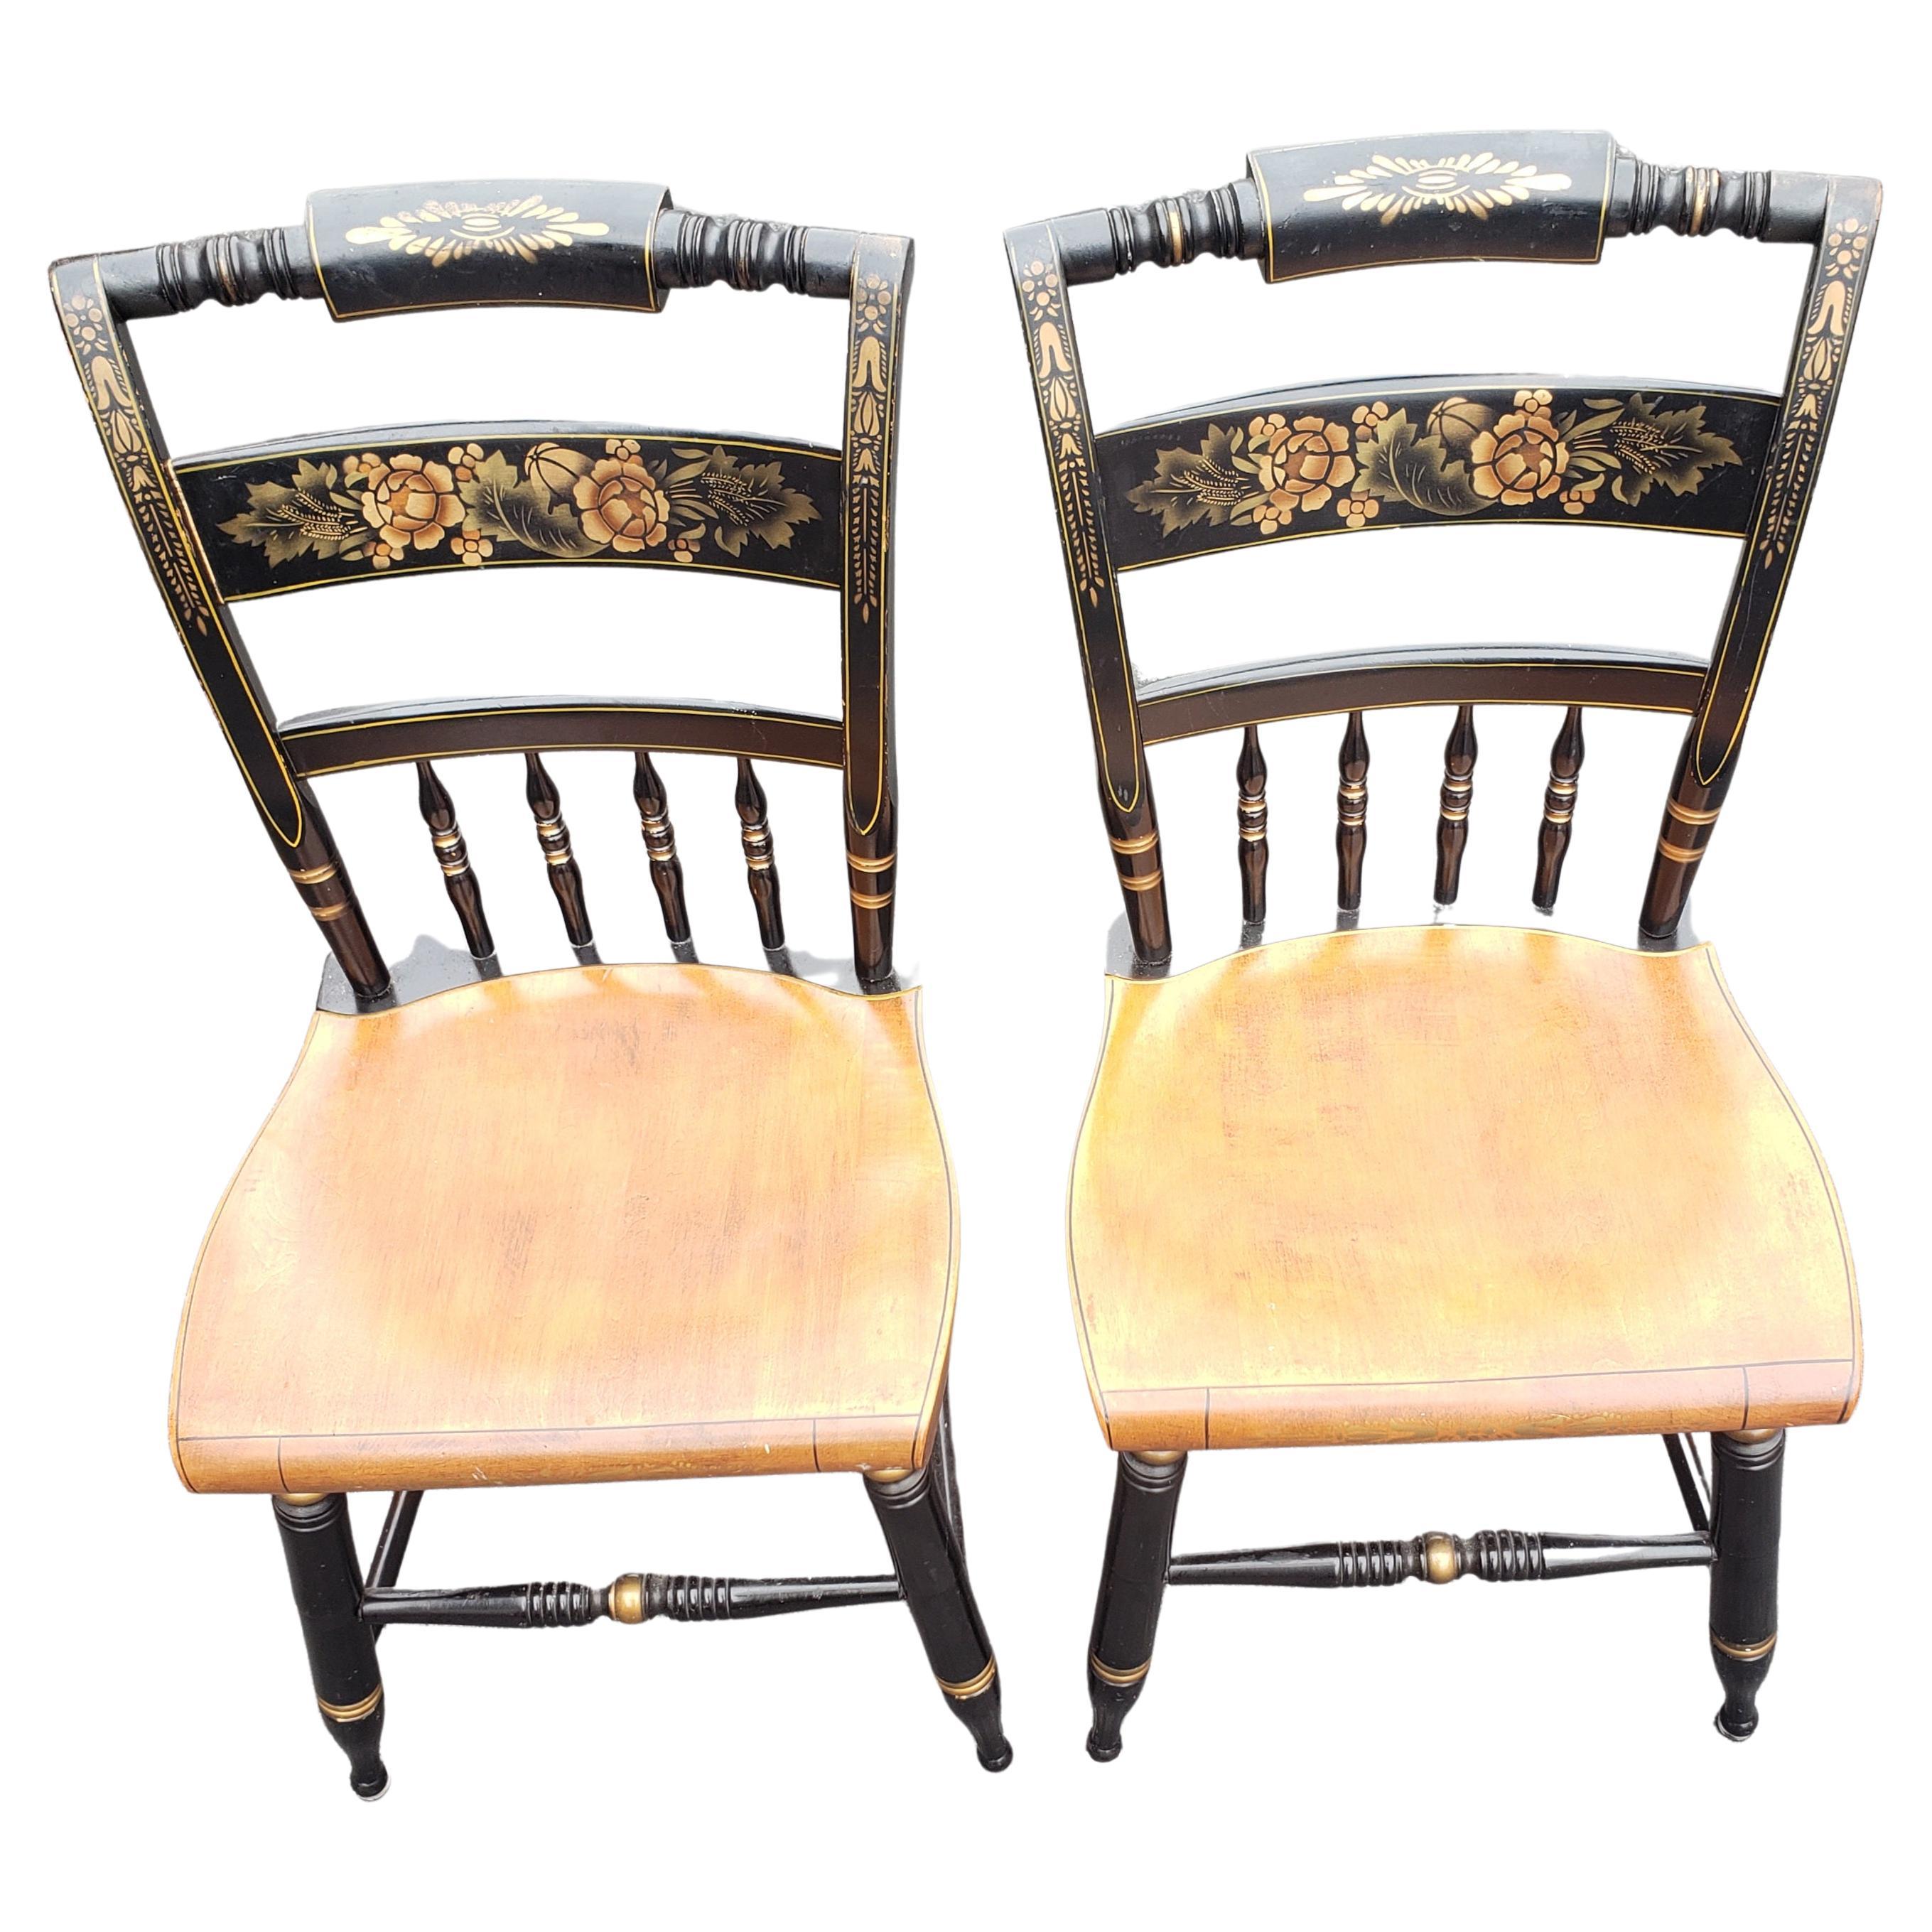 Beautifully designed and painted pair of Lambert Hitchcock spindle ladder back chairs in great vintage condition. These are actual Lambert Hitchcock chairs.
Measures 15.5